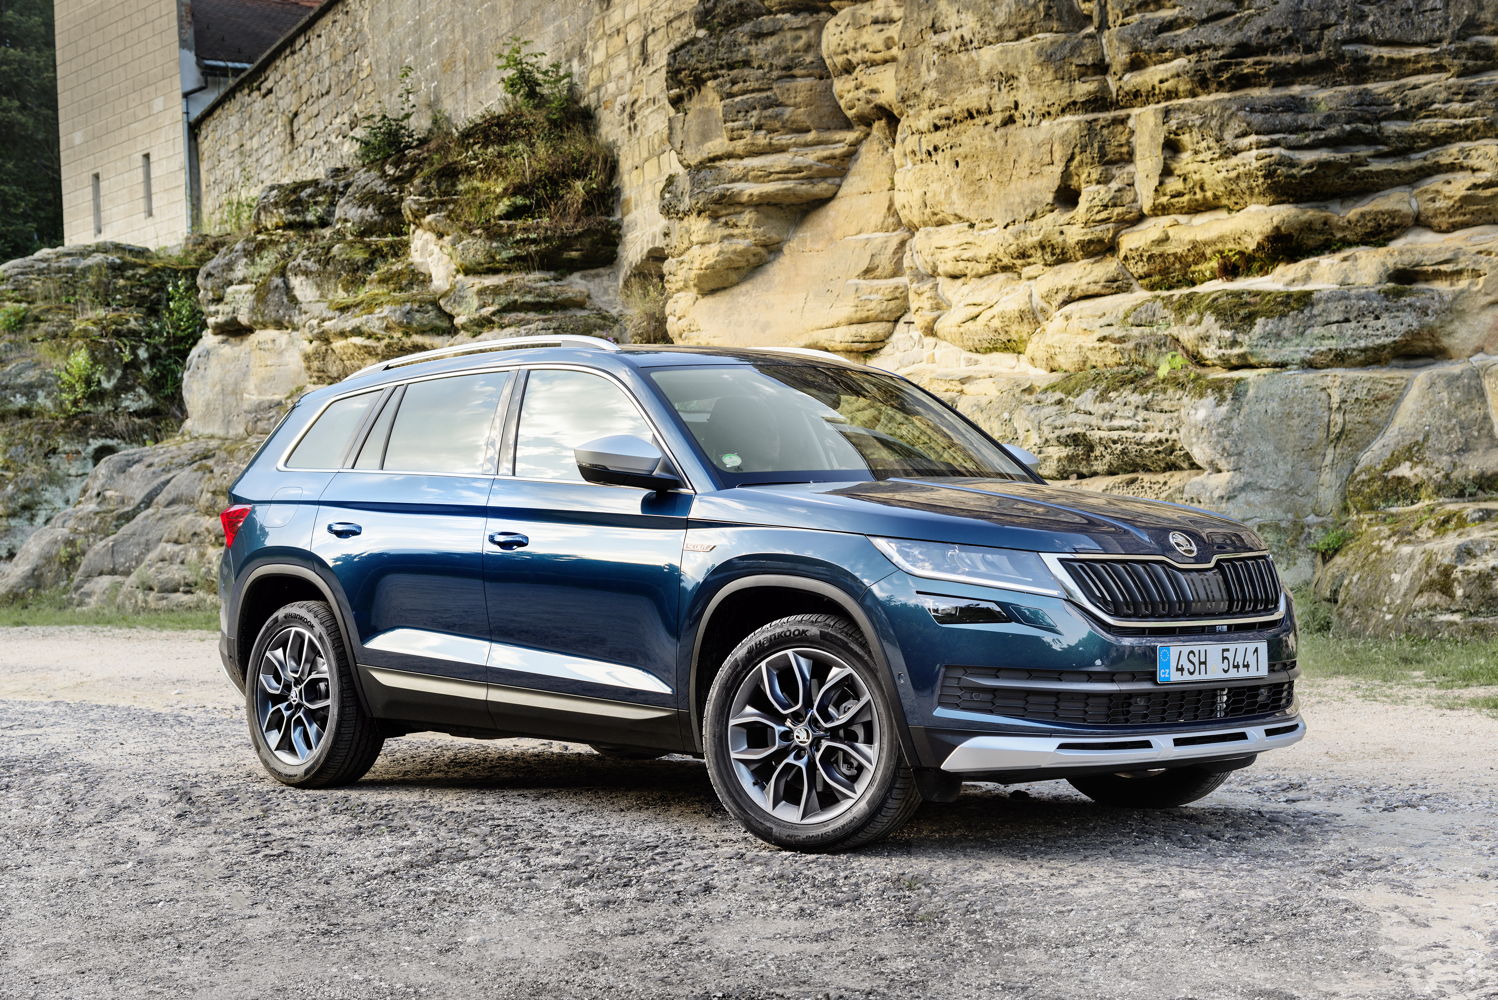 The ŠKODA KODIAQ SCOUT stands out with its distinct design features. The SCOUT variant (4,706 mm) is nine millimetres longer than the base model KODIAQ and, just like the base model, offers up to seven seats as well as the largest boot in its segment. The ŠKODA KODIAQ SCOUT impresses in many areas: with its modern design, it represents a successful mix of emotiveness and rationality.